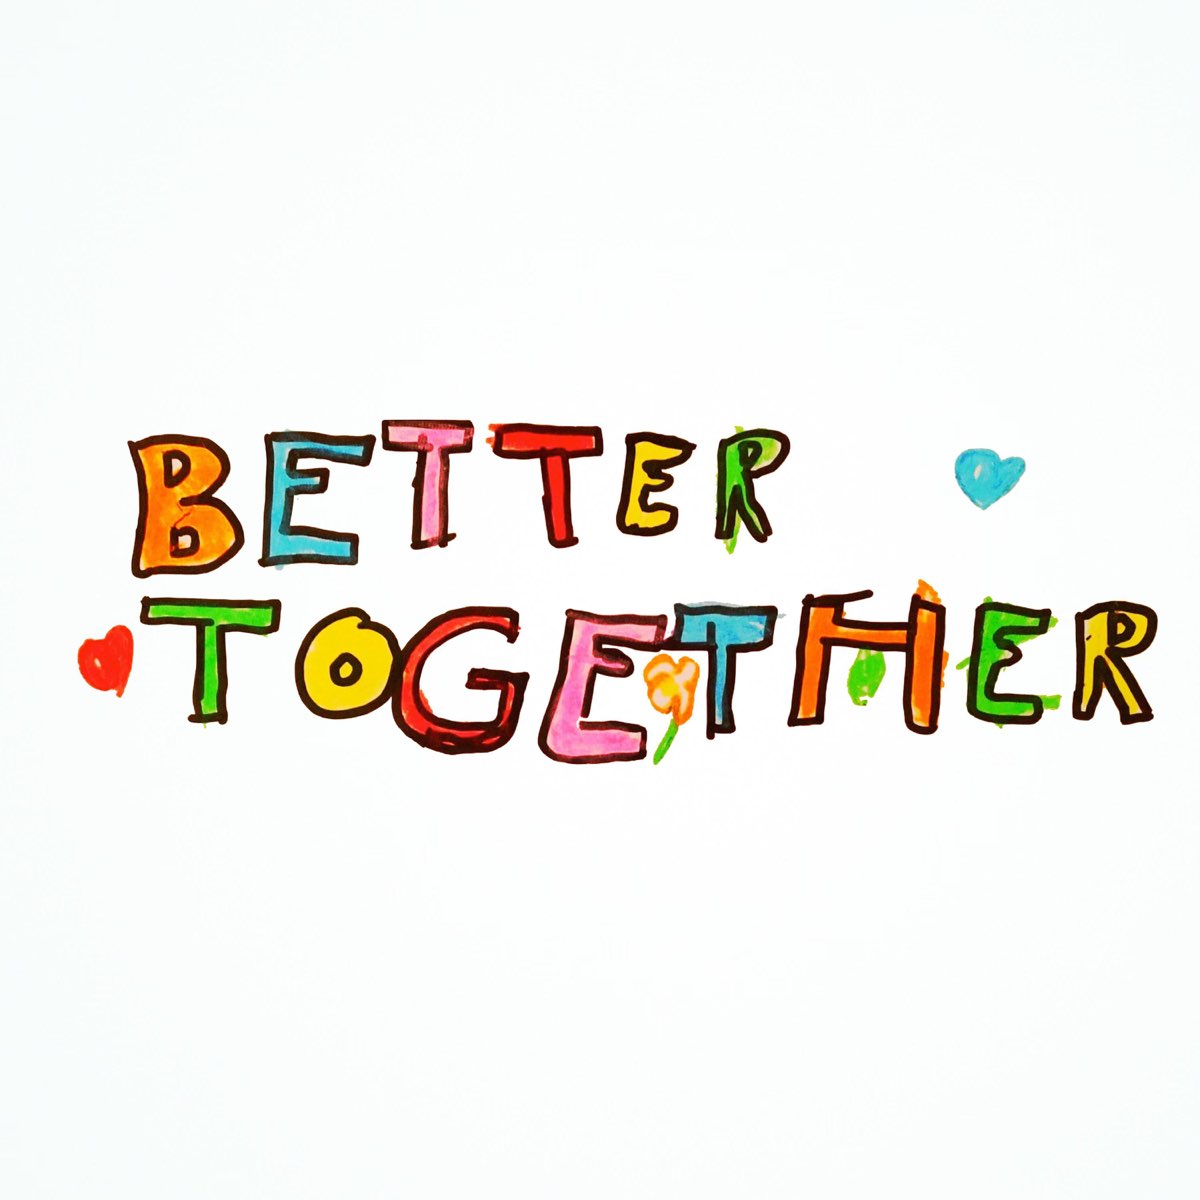 Much better together. Better together.